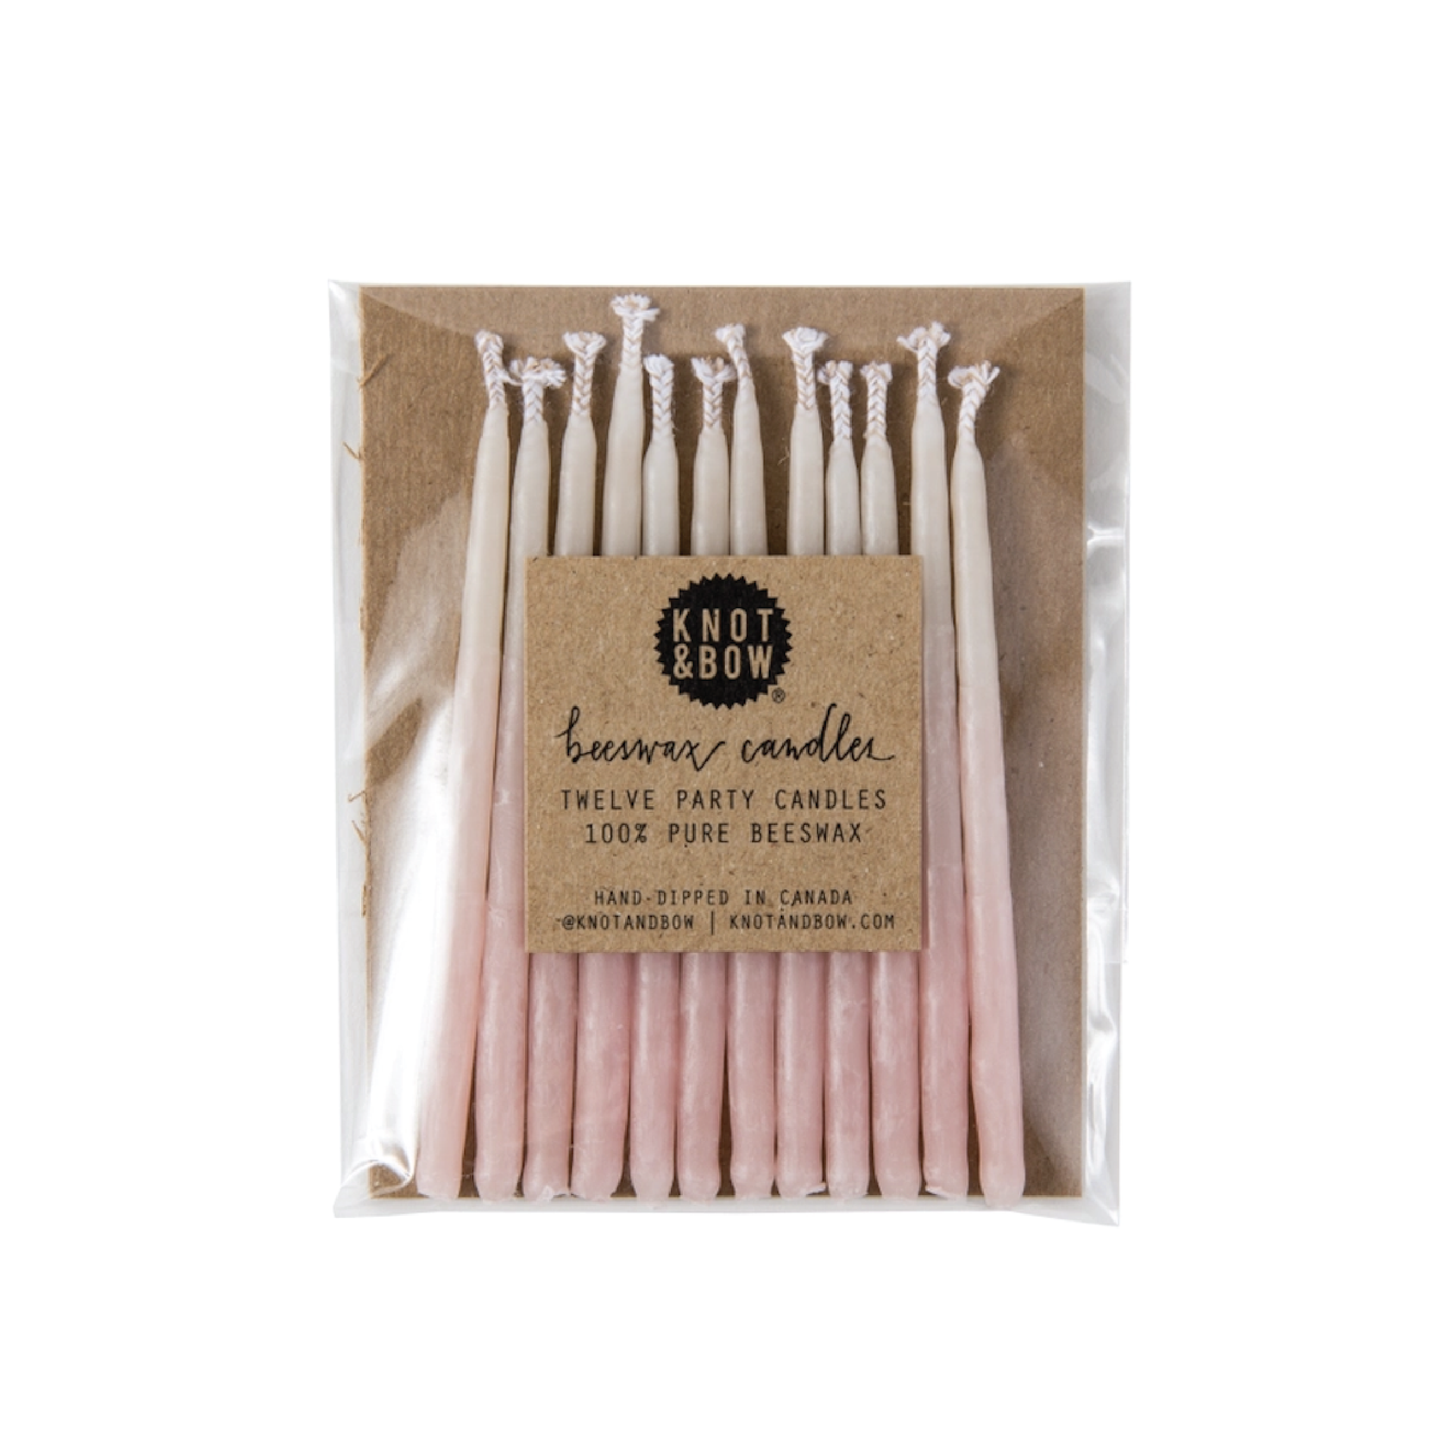 SALE - Pink Ombre Beeswax Birthday Candles